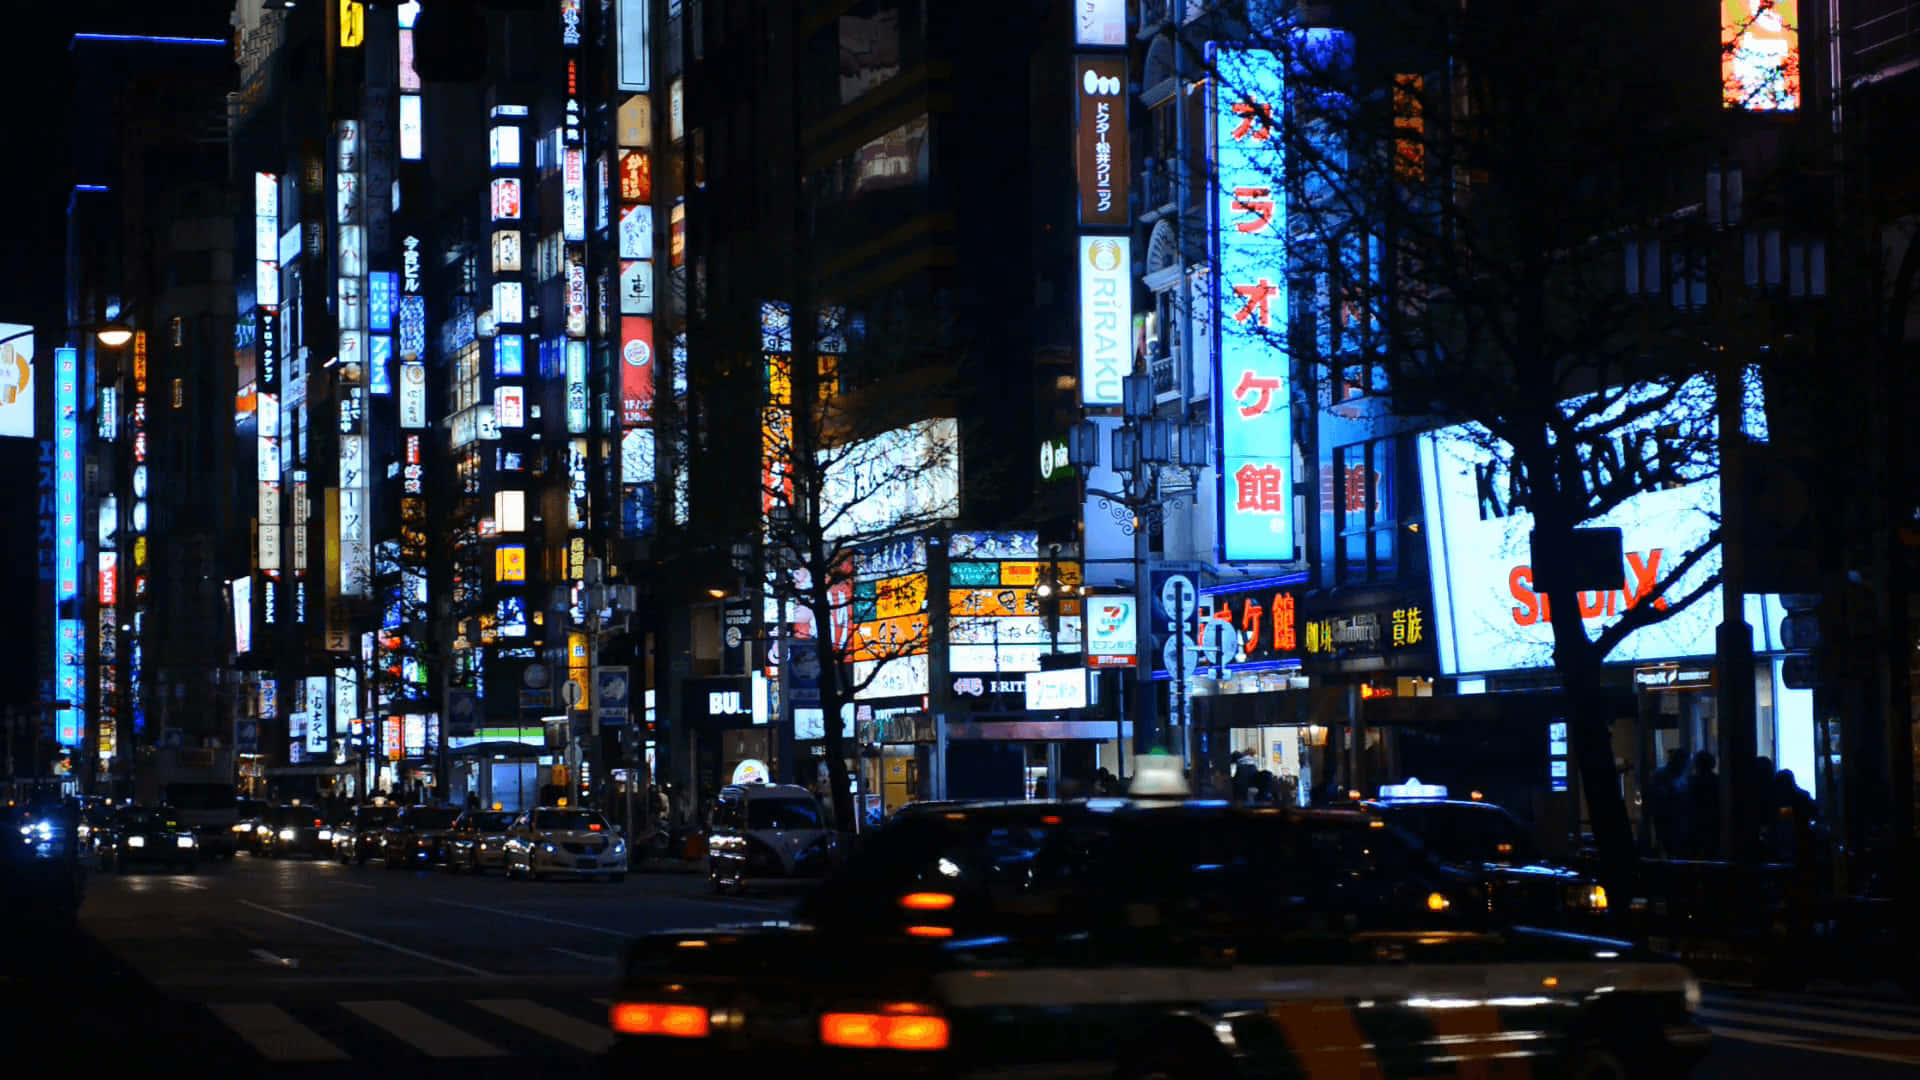 "Experience a night to remember in Japan's vibrant neon cities." Wallpaper